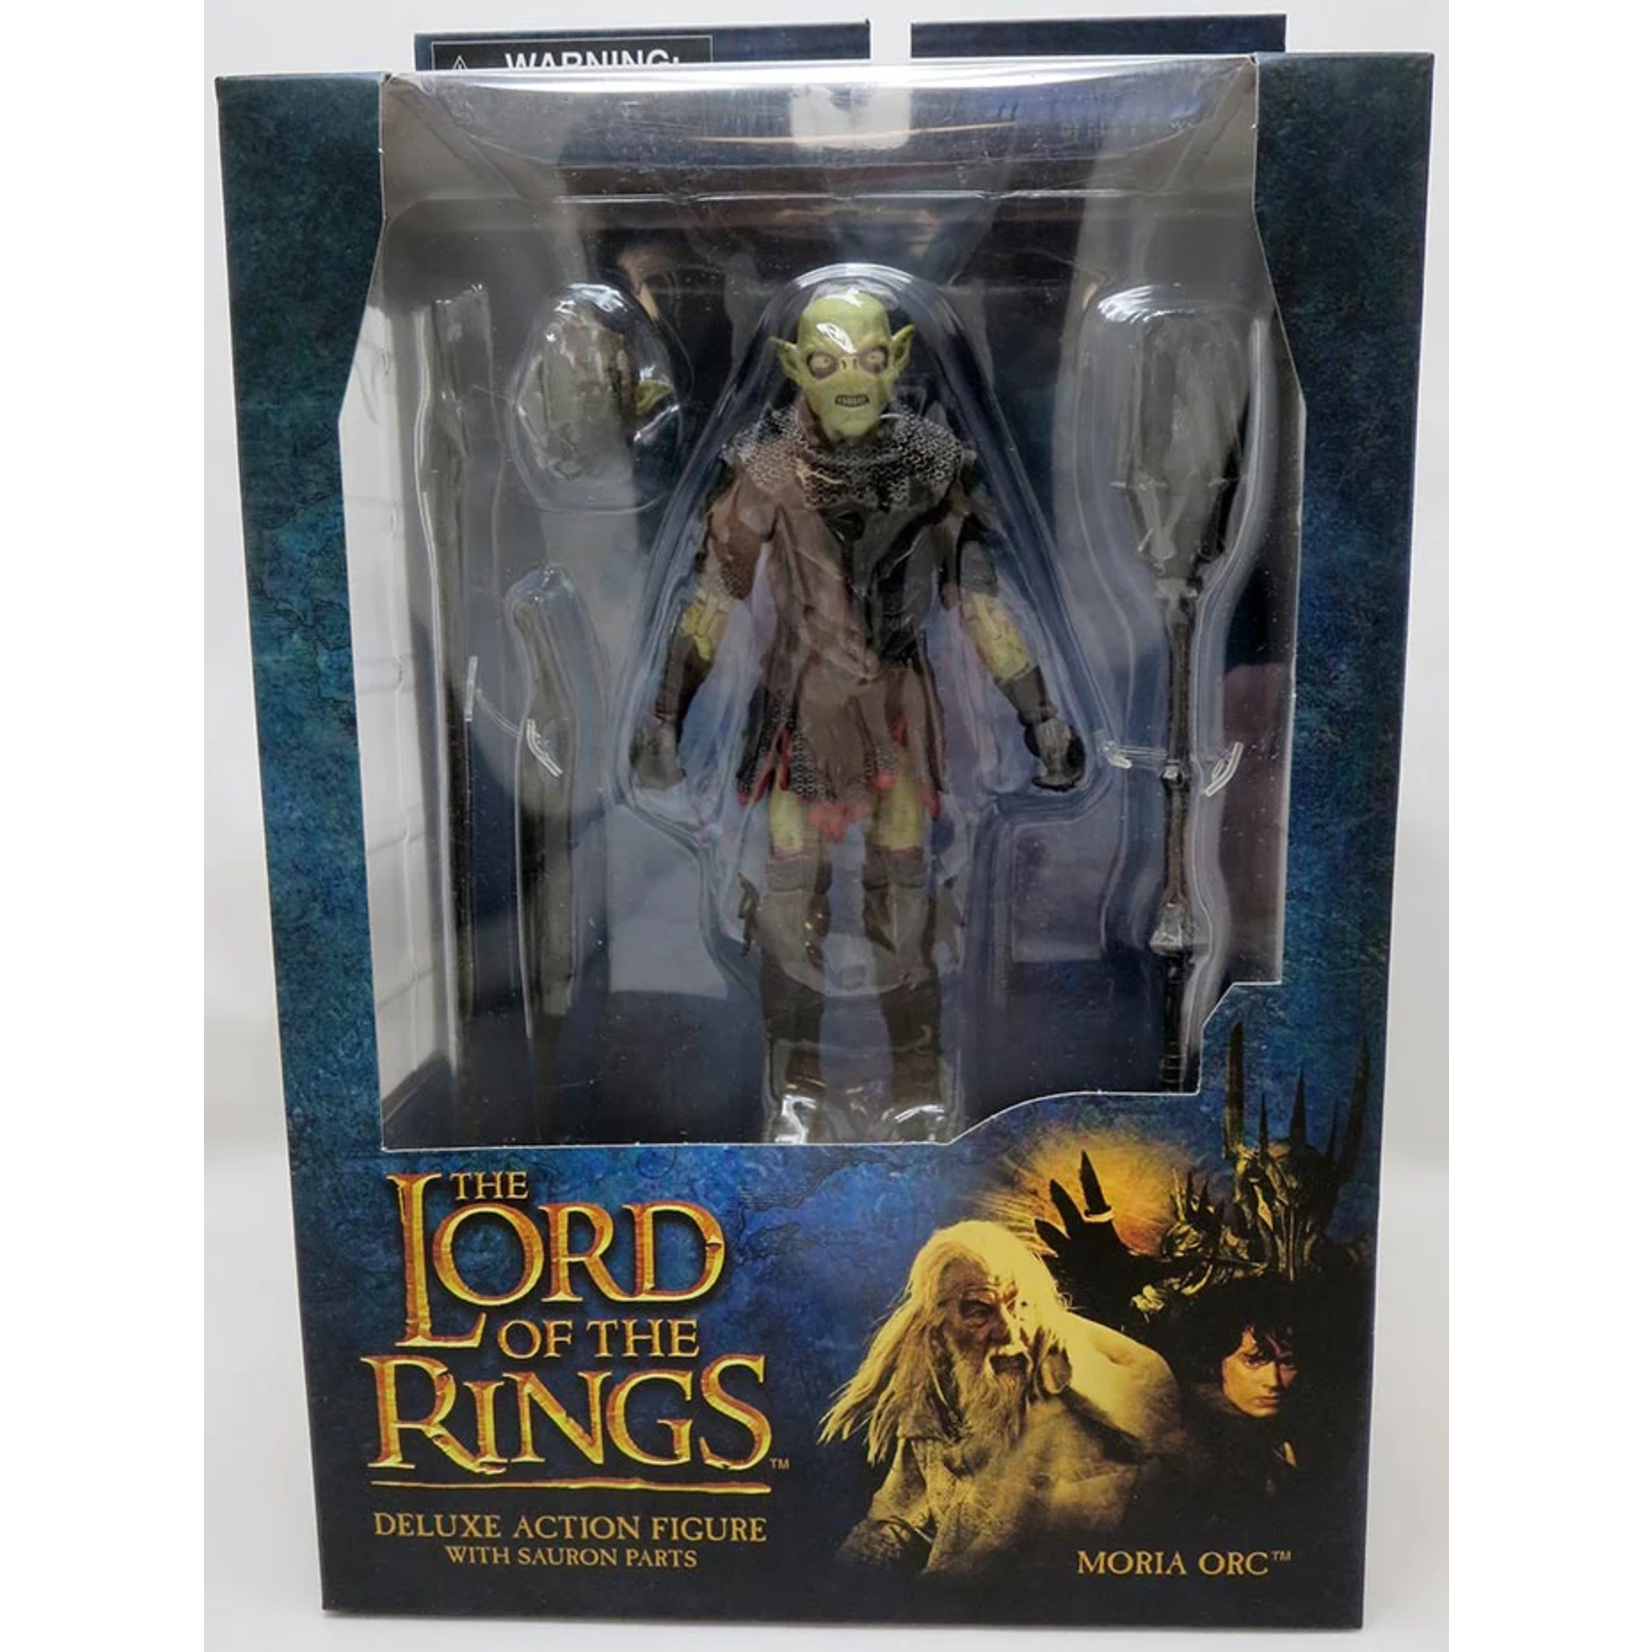 Diamond Select Lord Of The Rings BAF Sauron 7 Inch Action Figure Deluxe Series 3 - Moria Orc